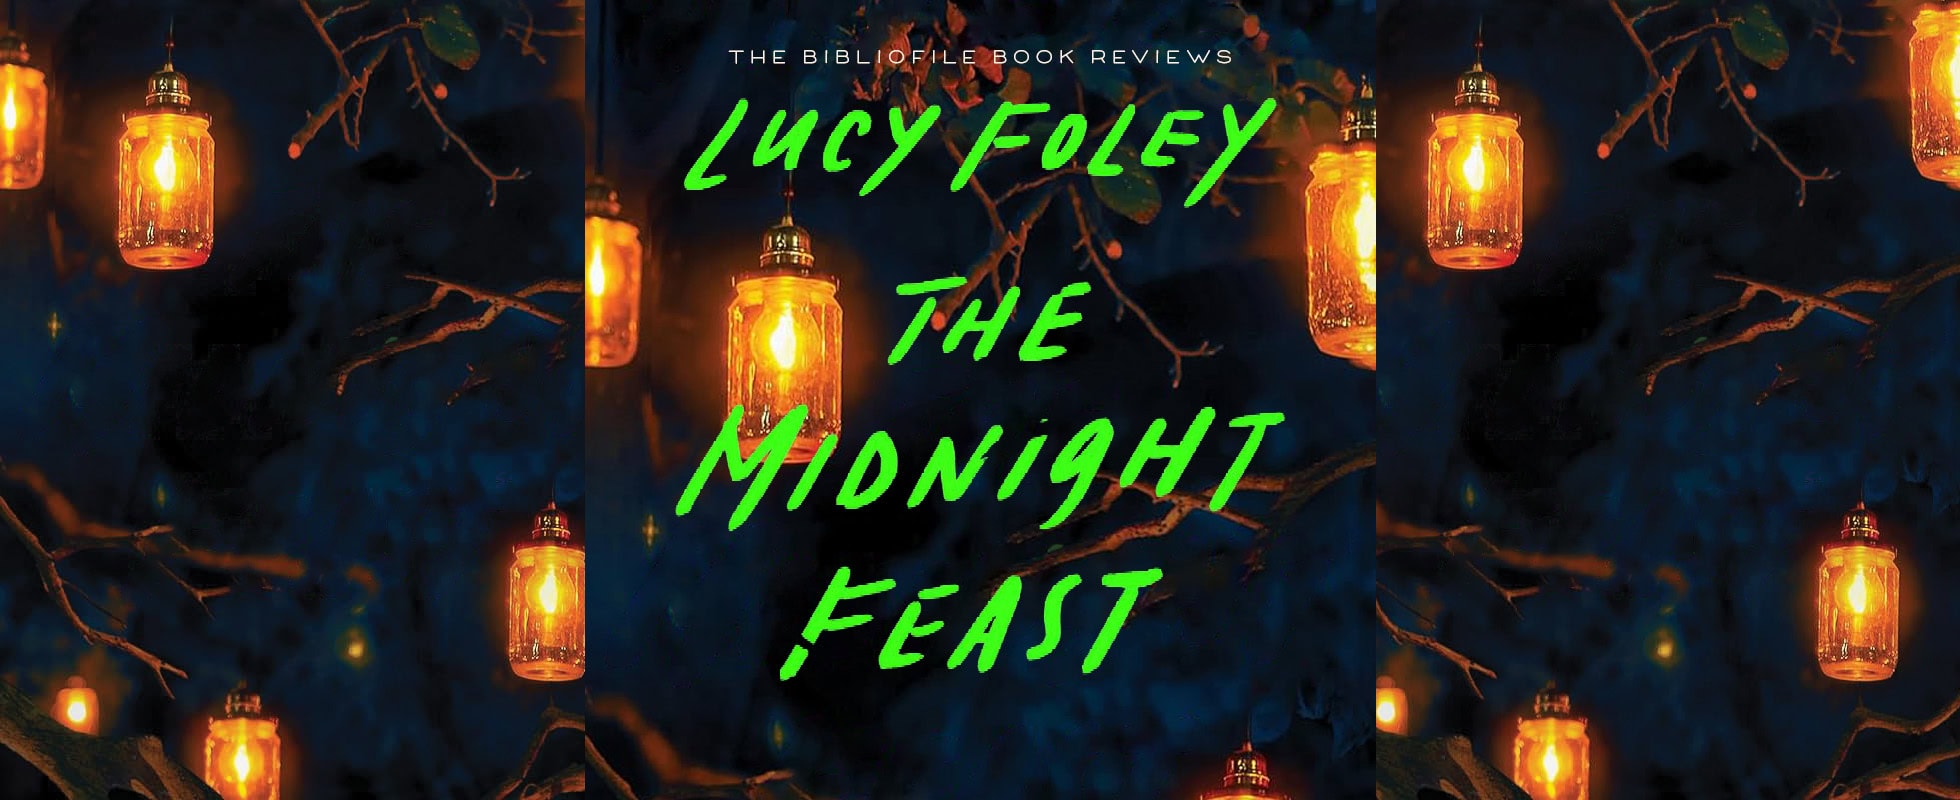 the midnight feast by lucy foley book review plot summary synopsis recap discussion spoilers